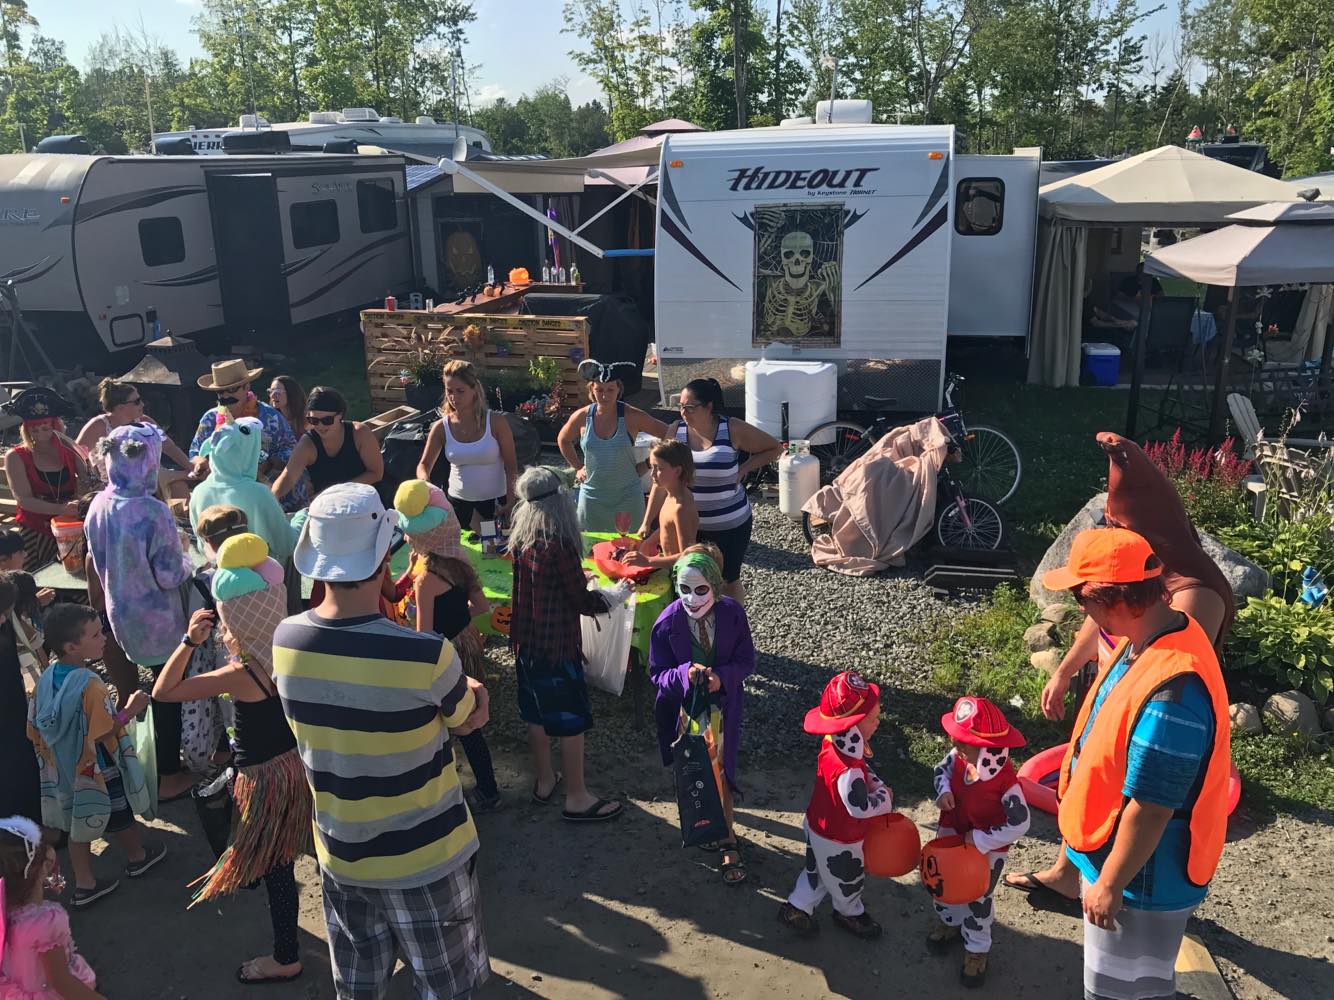 http://www.familycampgrounds.ca/wp-content/uploads/2018/08/halloween-complexe-atlantide-2018-16.jpg